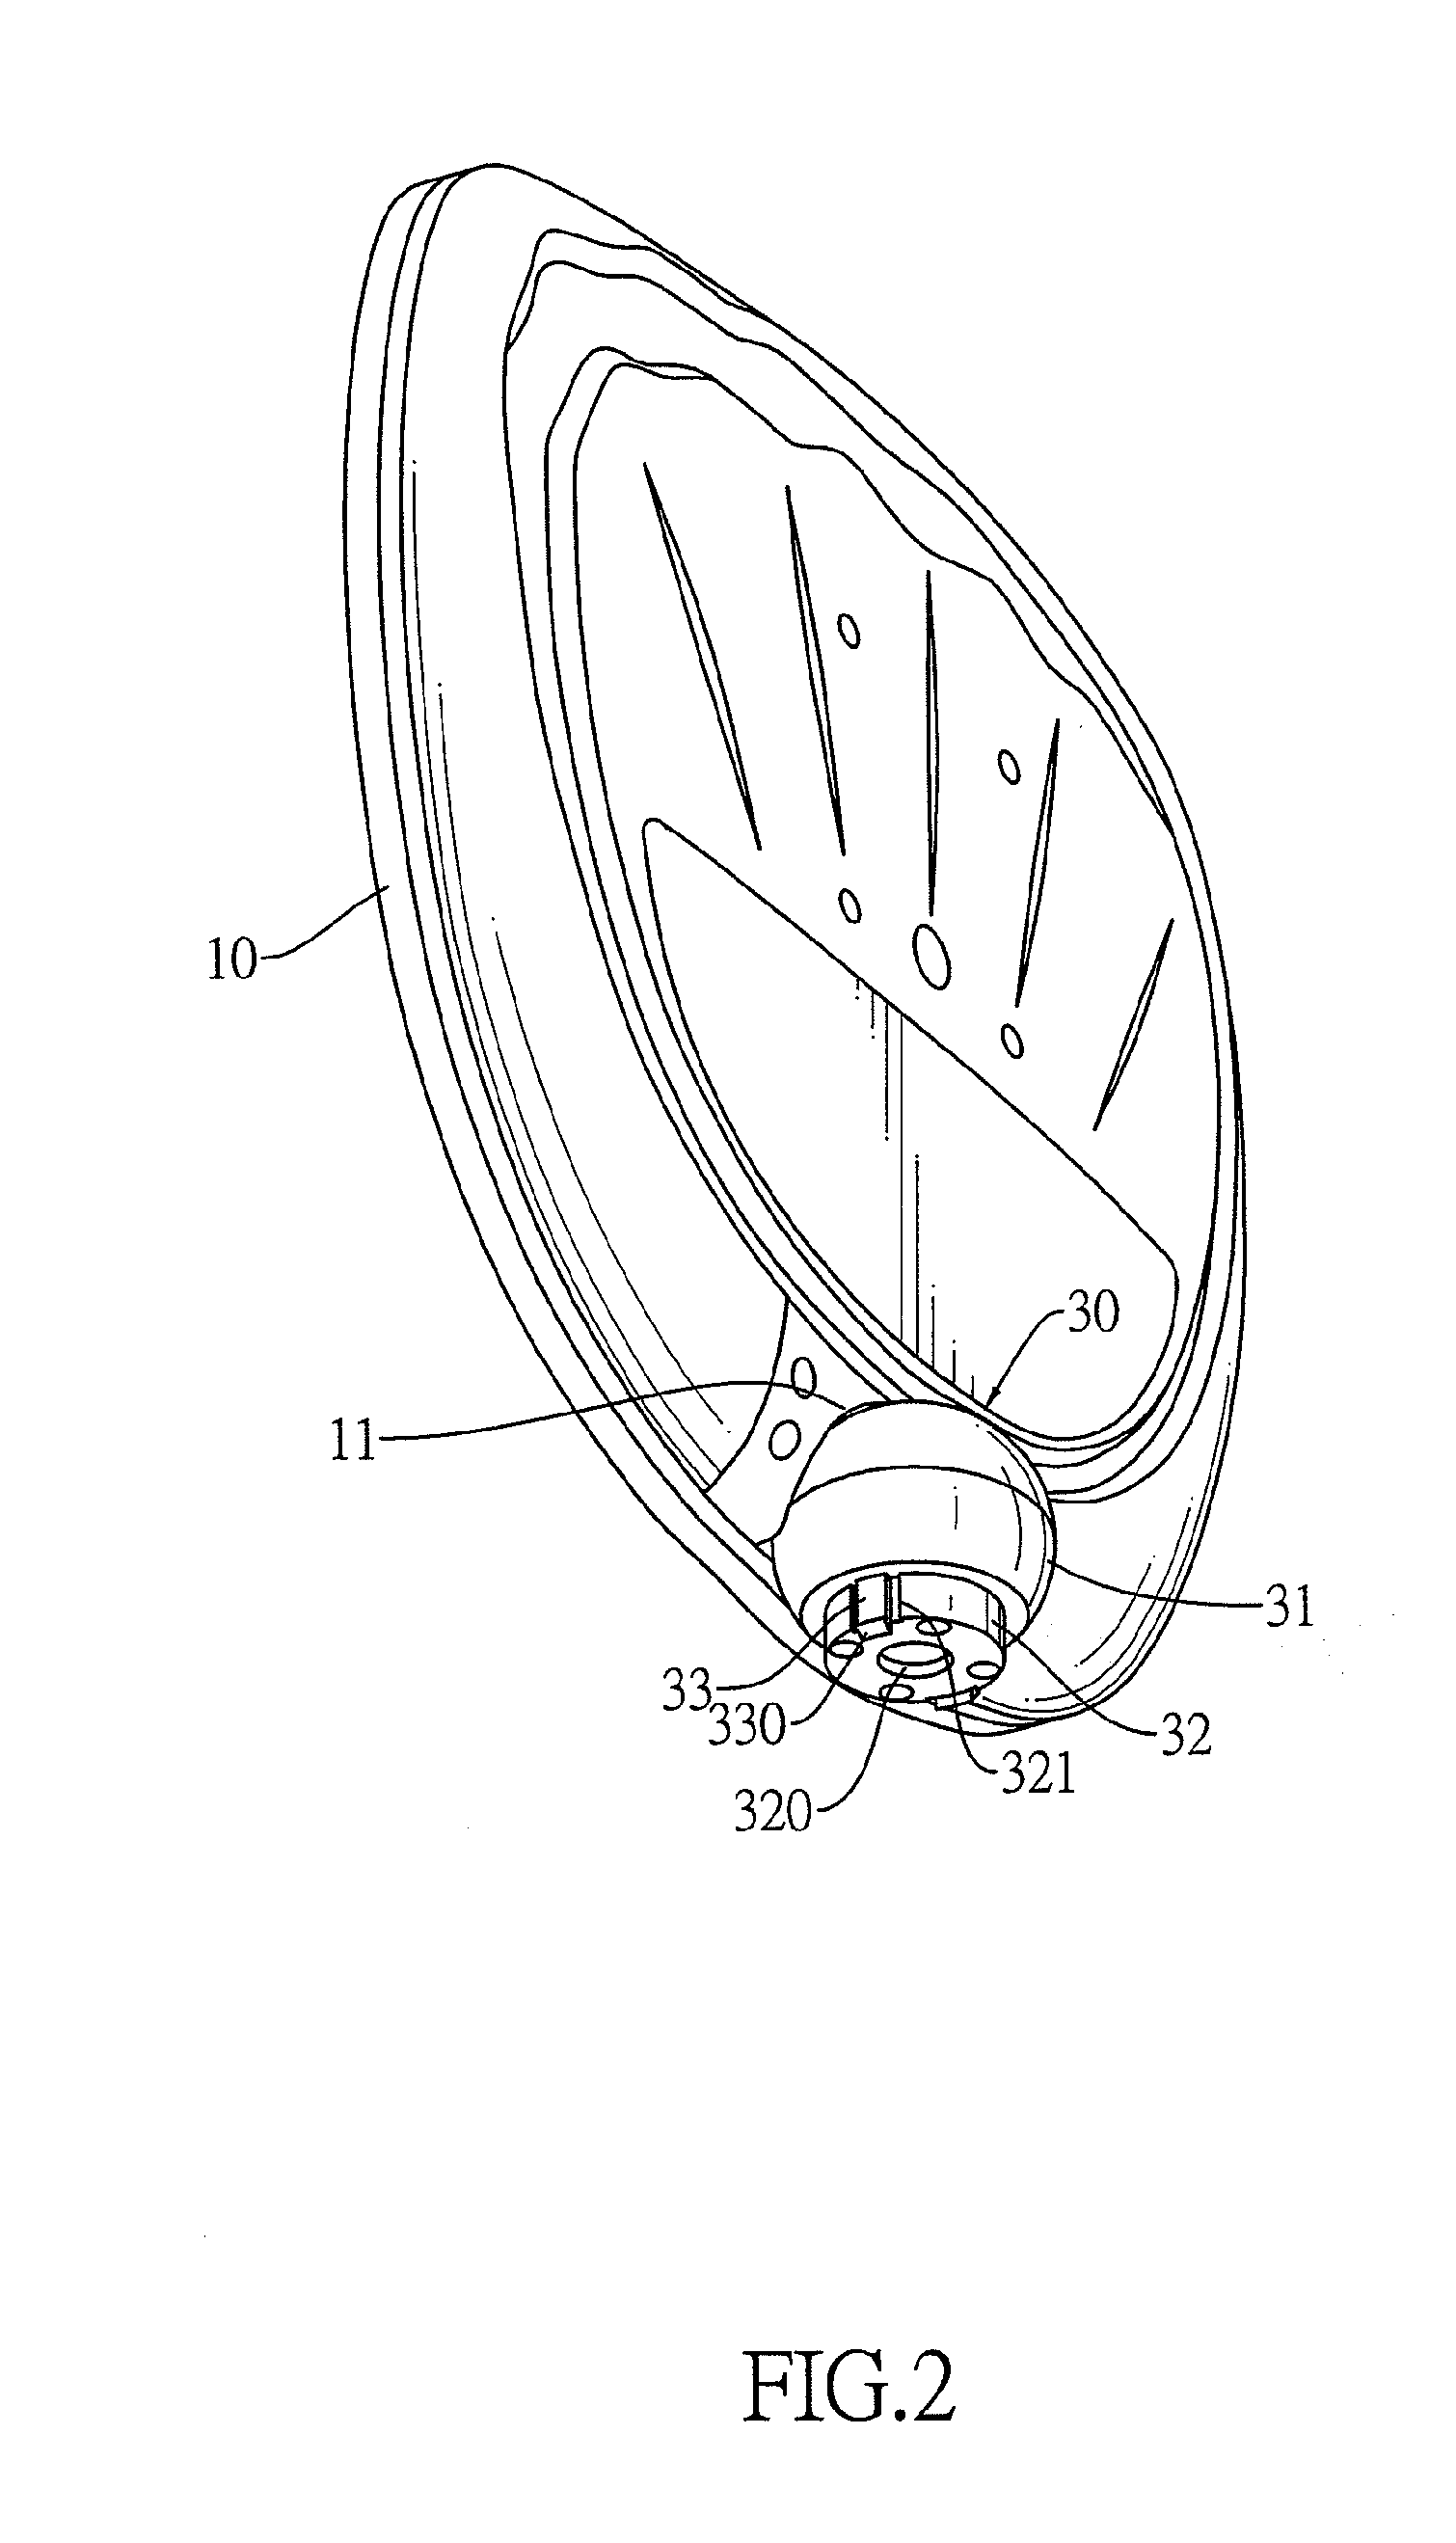 Display and detachable base assembly thereof